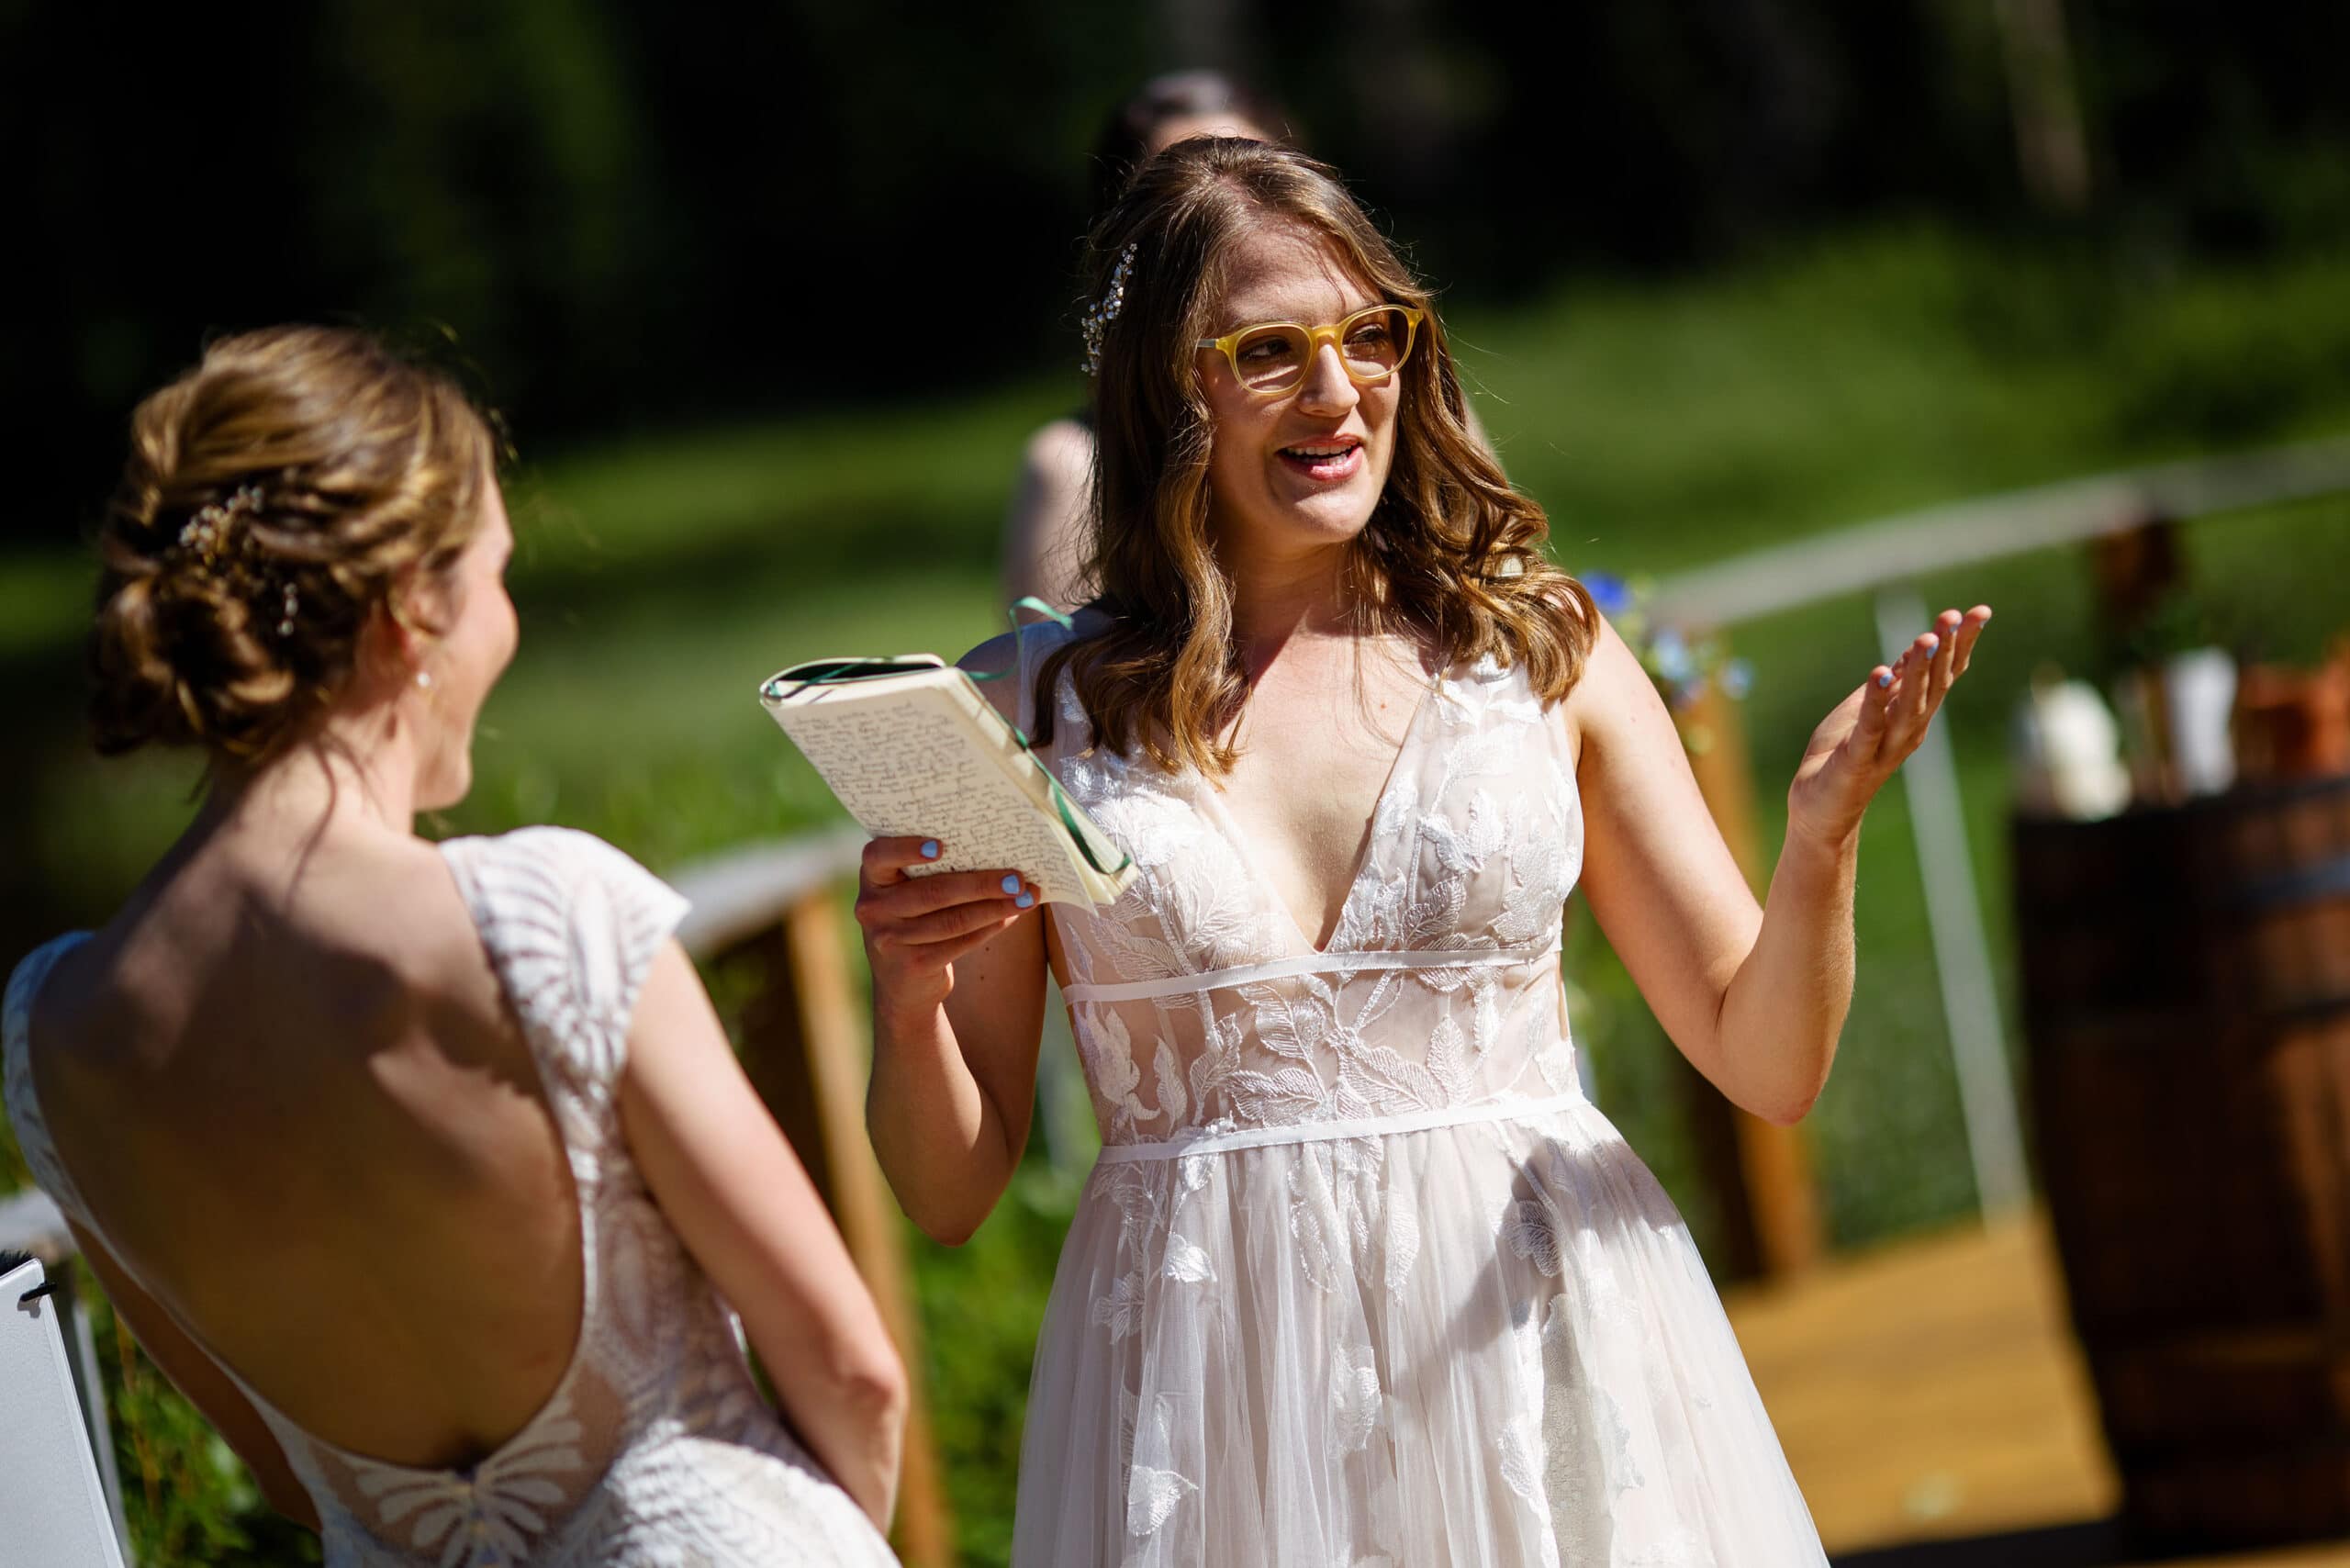 Alice reads her vows